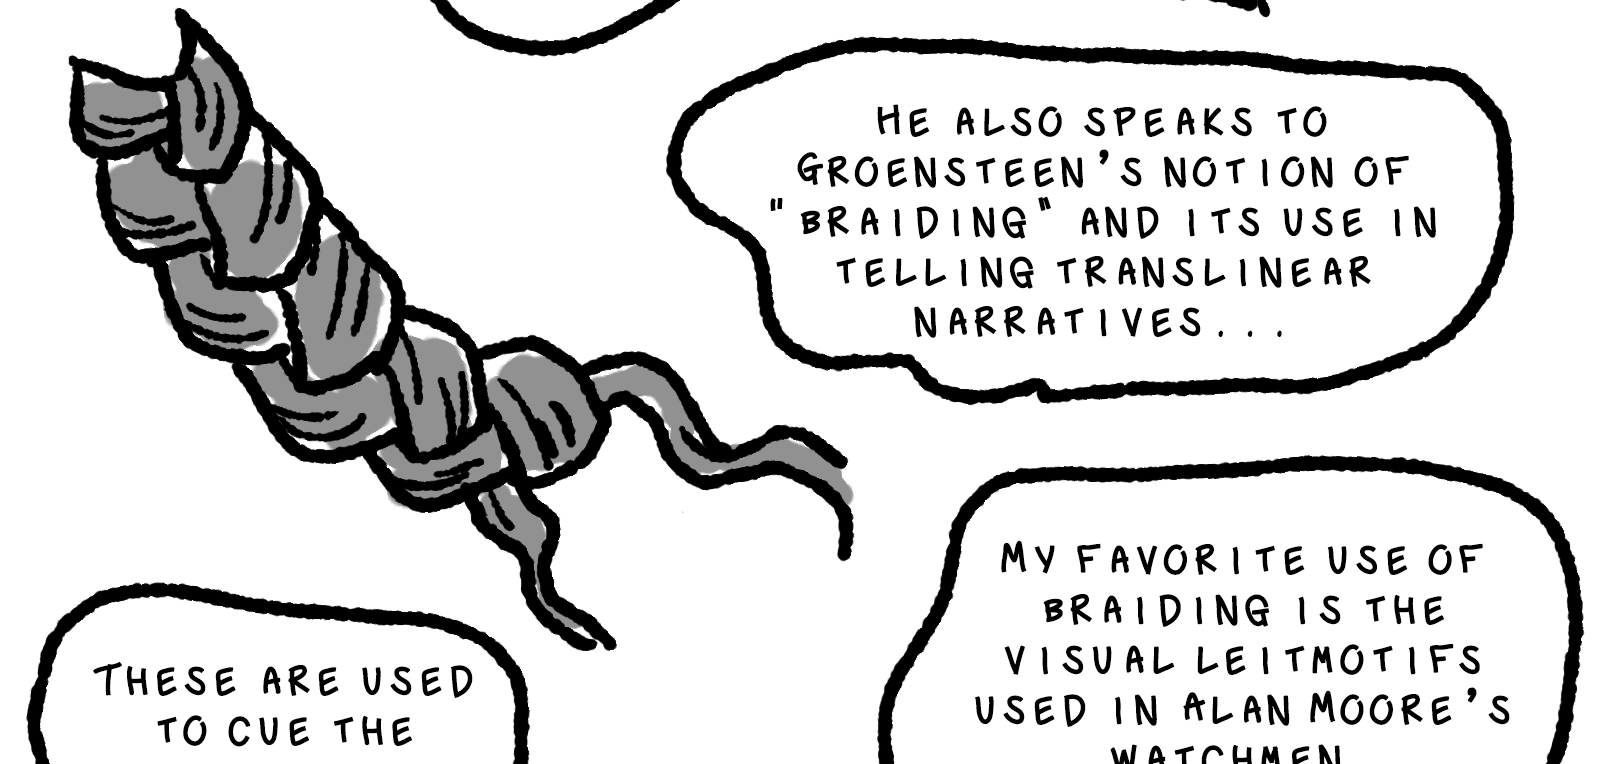 A narrative bubble reads: He also speaks to Groensteen's notion of 'braiding' and its use in telling translinear narratives. Pictured is a braid with loose ends that traverses the screen from left to right diagonally, cutting through the word balloons. The narrator continues: These are used to cue the reader to plot lines that occur across the whole book! My favorite use of braiding is the visual leitmotifs used in Alan Moore's Watchmen [link].